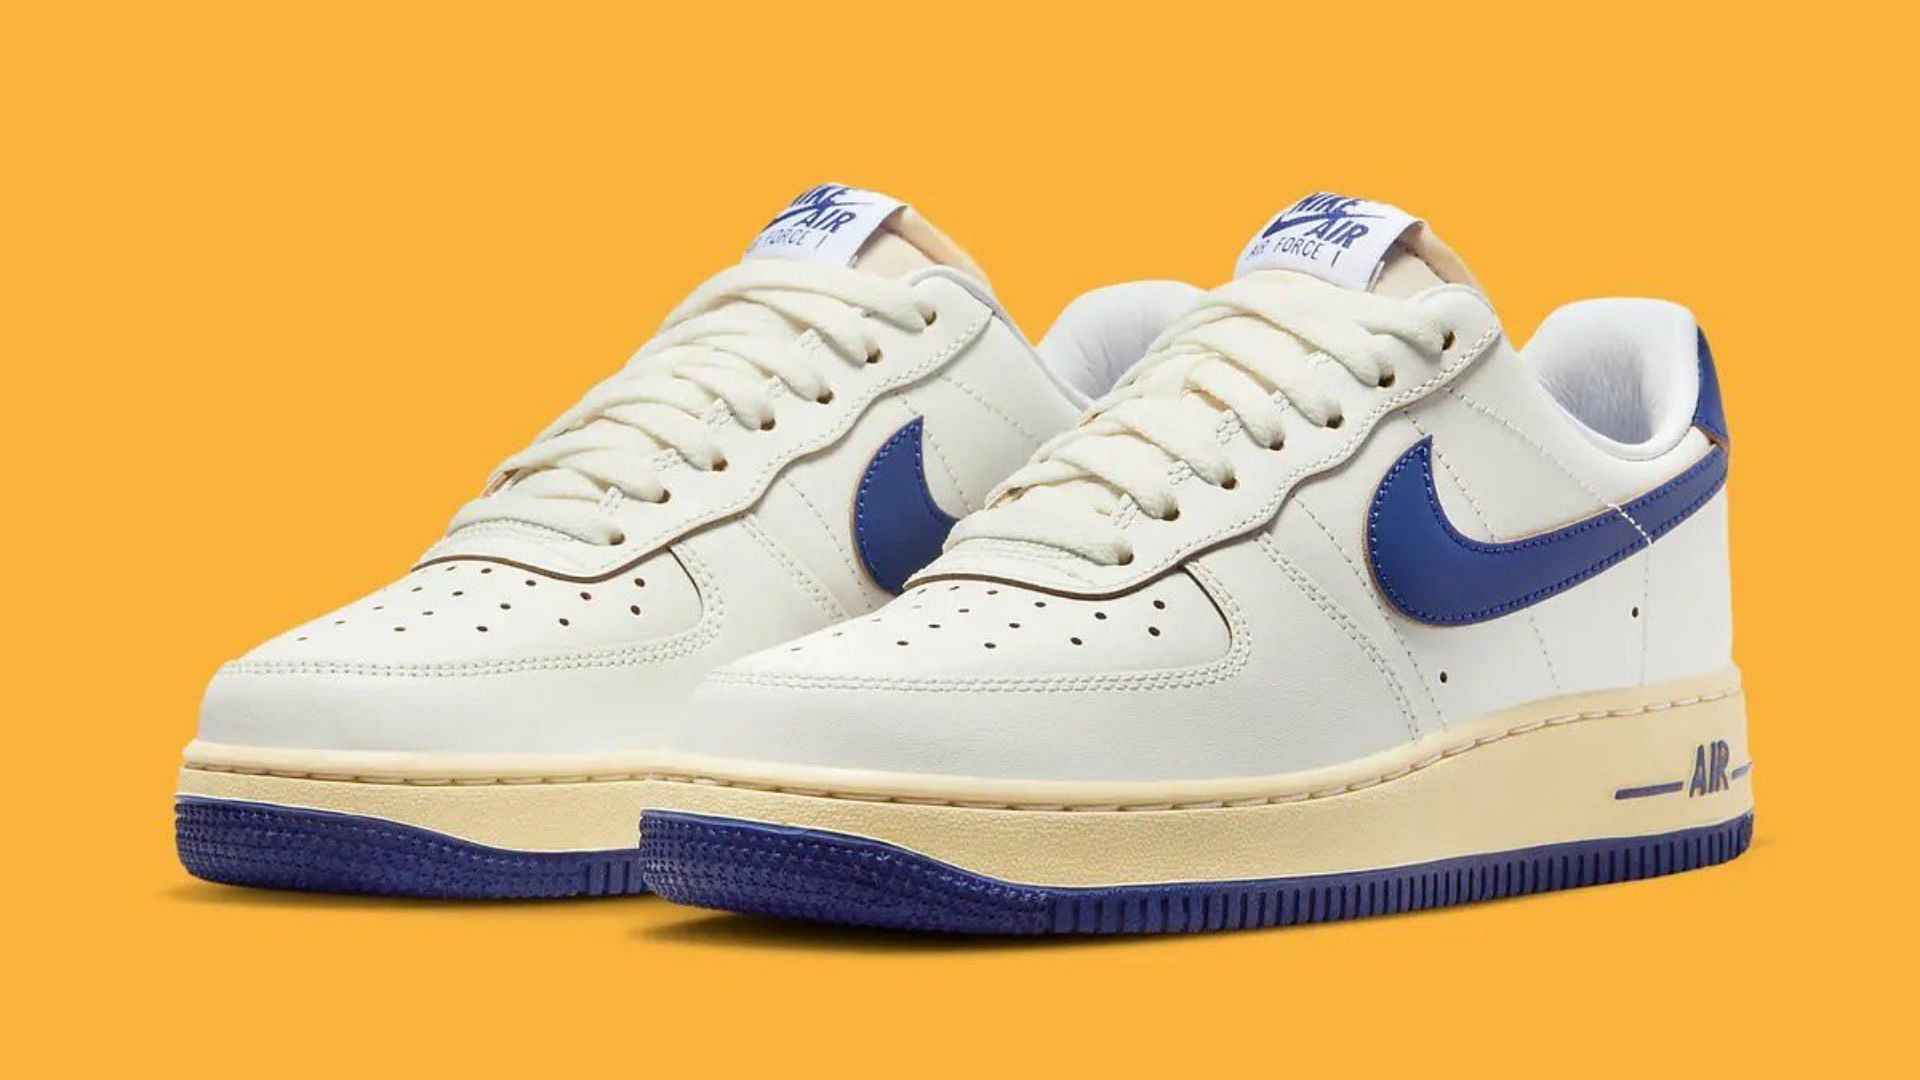 Athletic Department: Nike Air 1 Low Athletic Department “White/Royal Blue” shoes: Everything we know so far